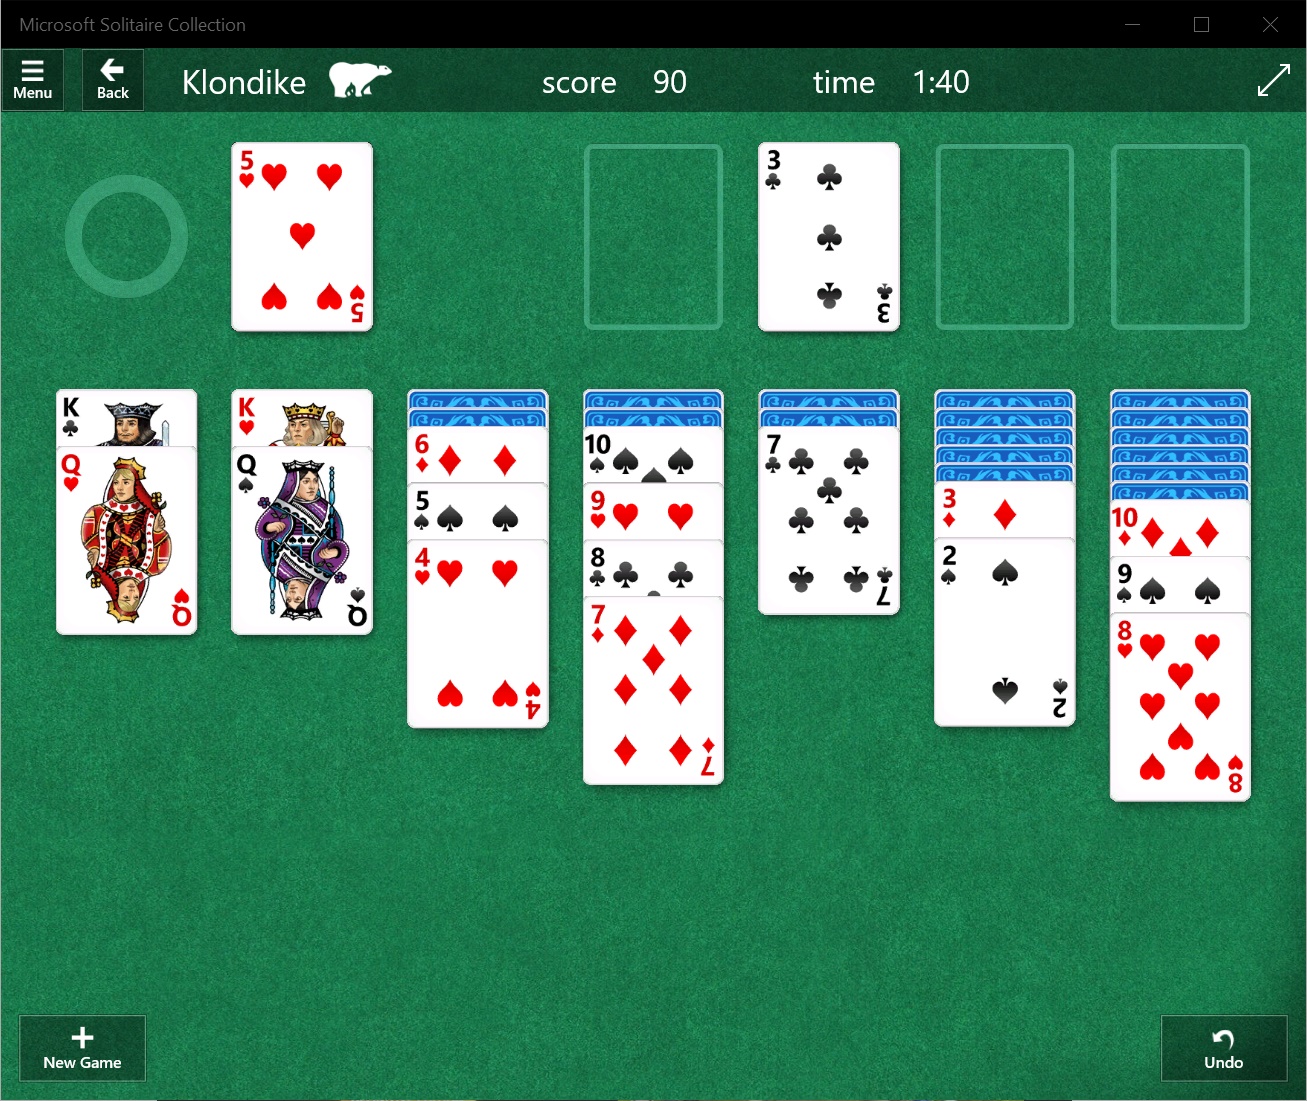 Microsoft Solitaire is 100 Million users strong